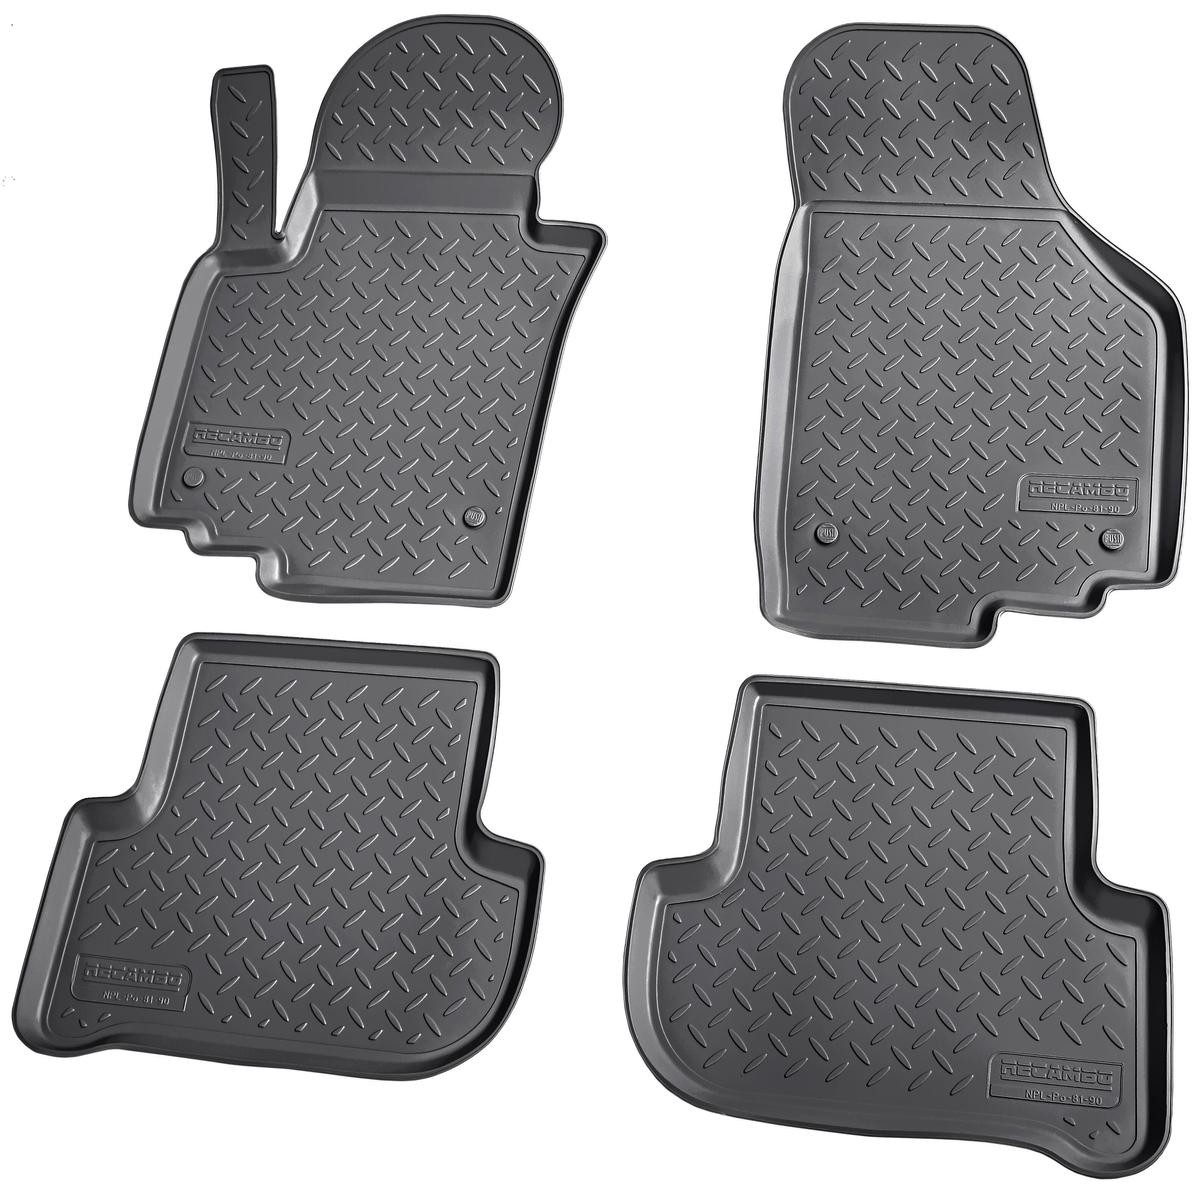 RECAMBO Rubber, Front and Rear, Quantity: 4, black, Tailored Car mats F-6360 buy